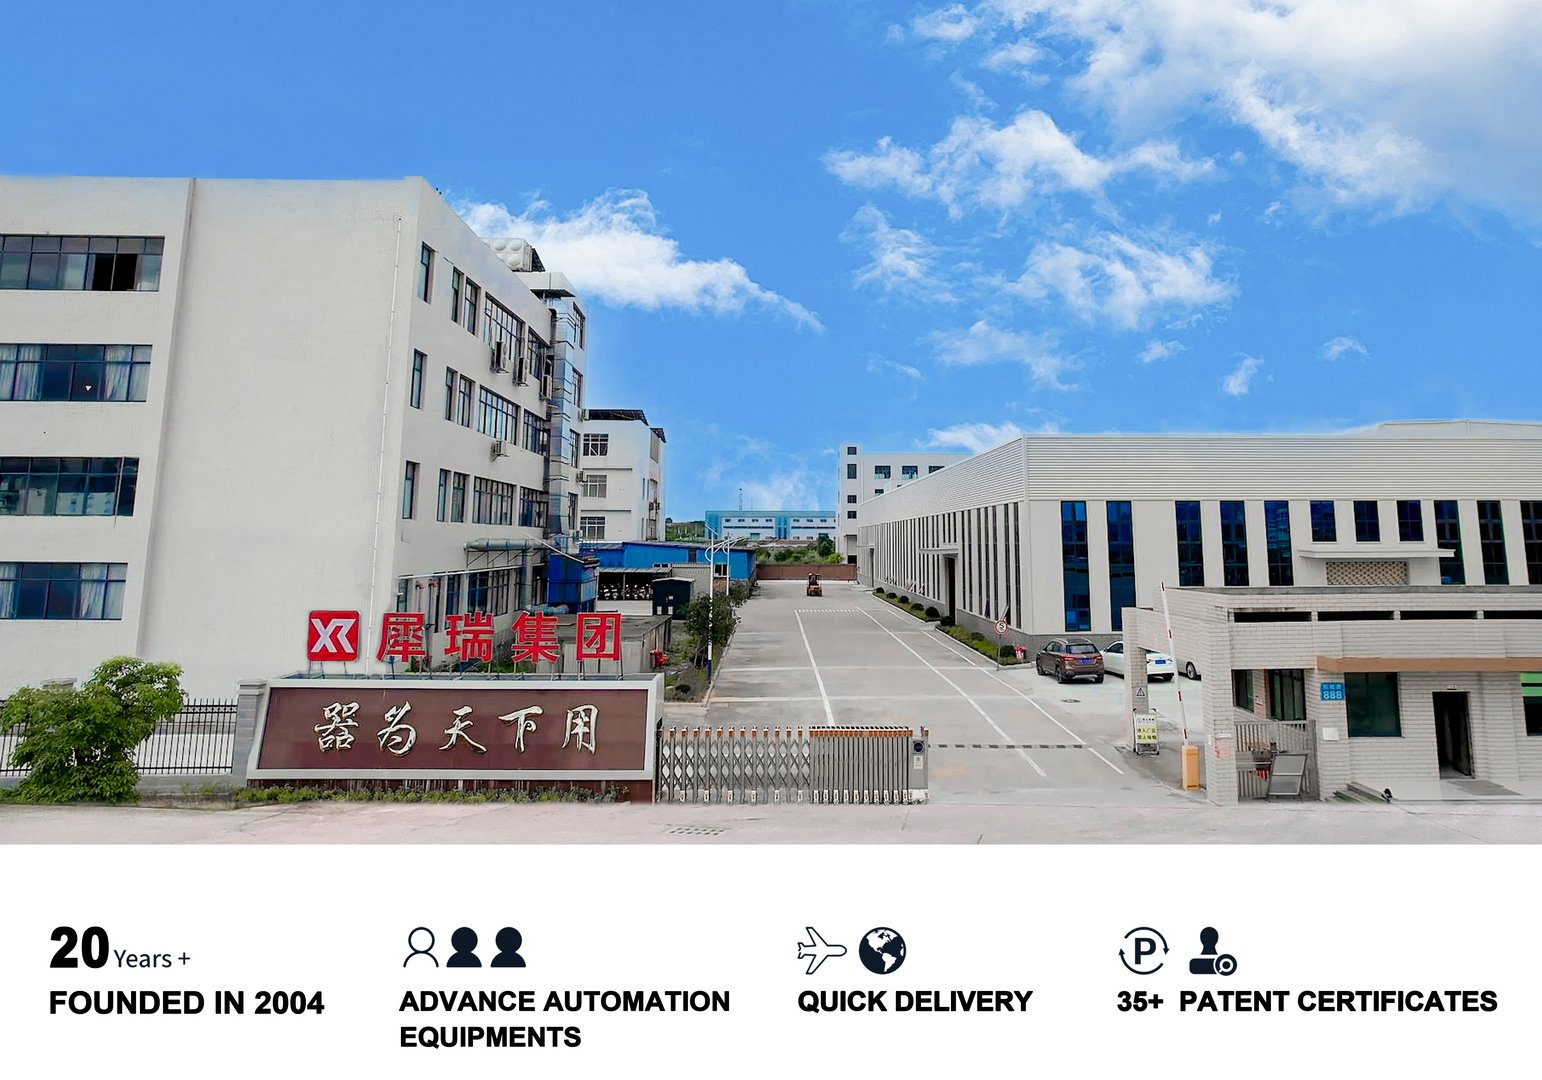 Xirui Manufacturing Factory with over 20 years of experience